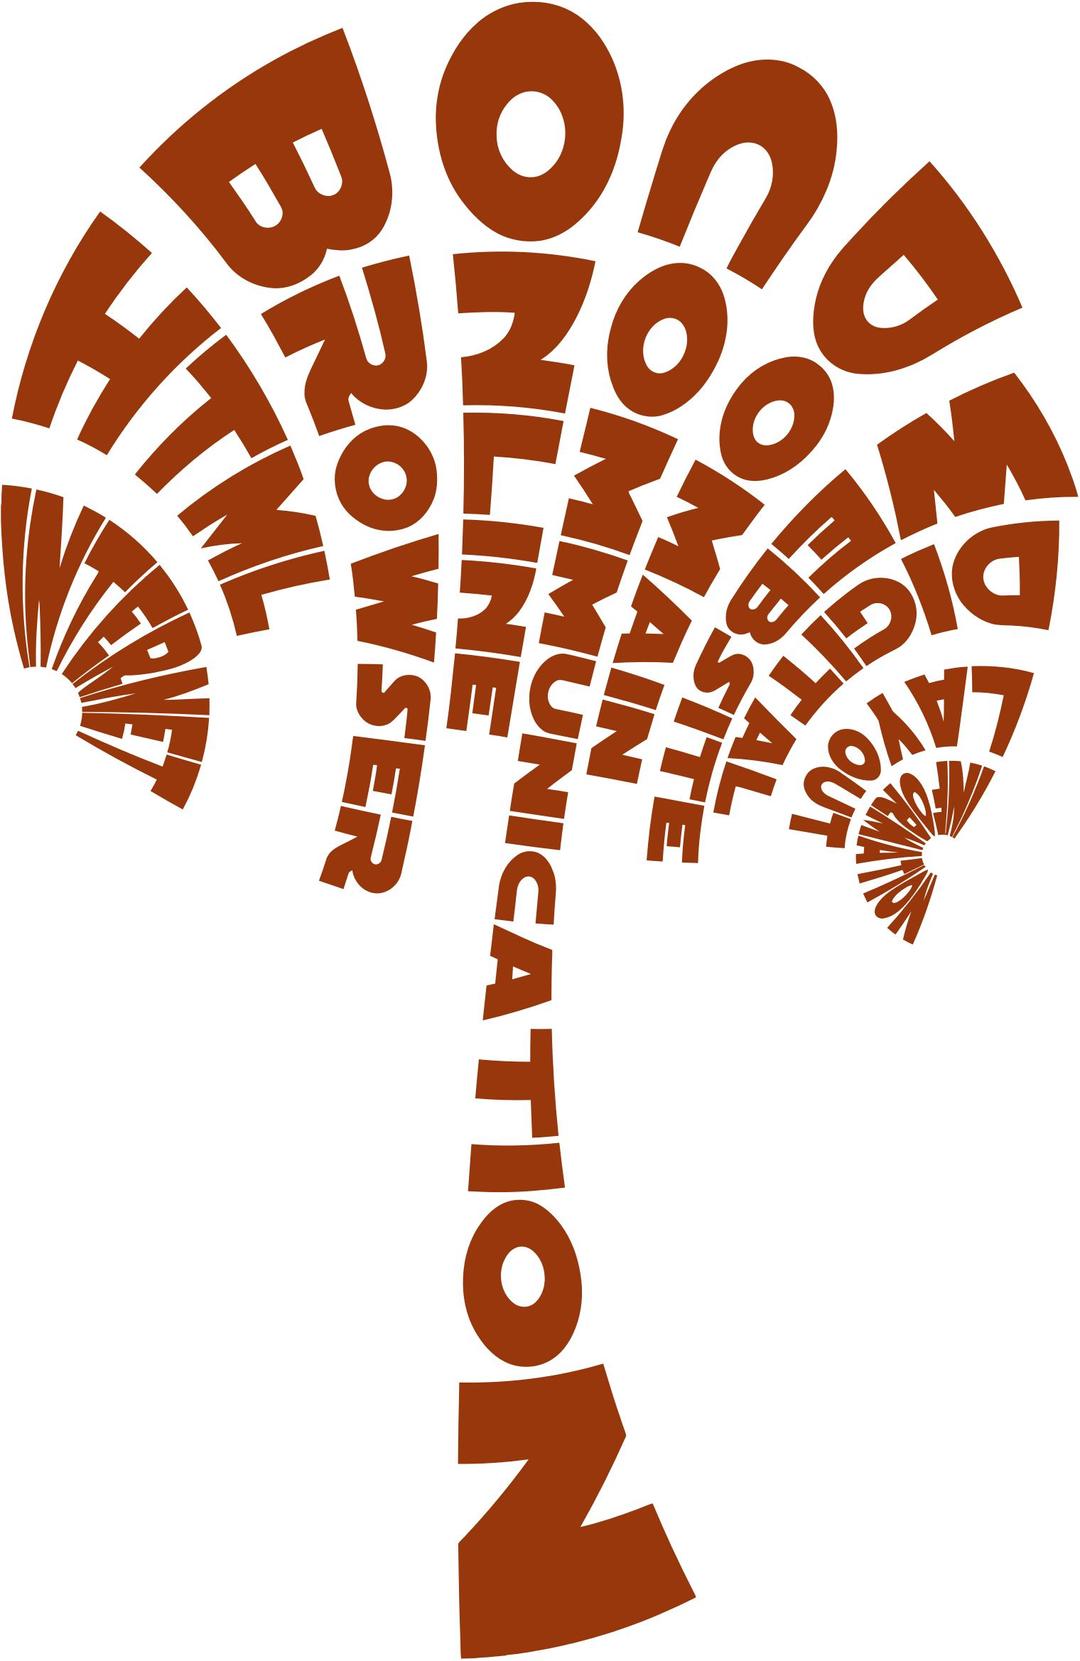 Web Tree Typography png transparent